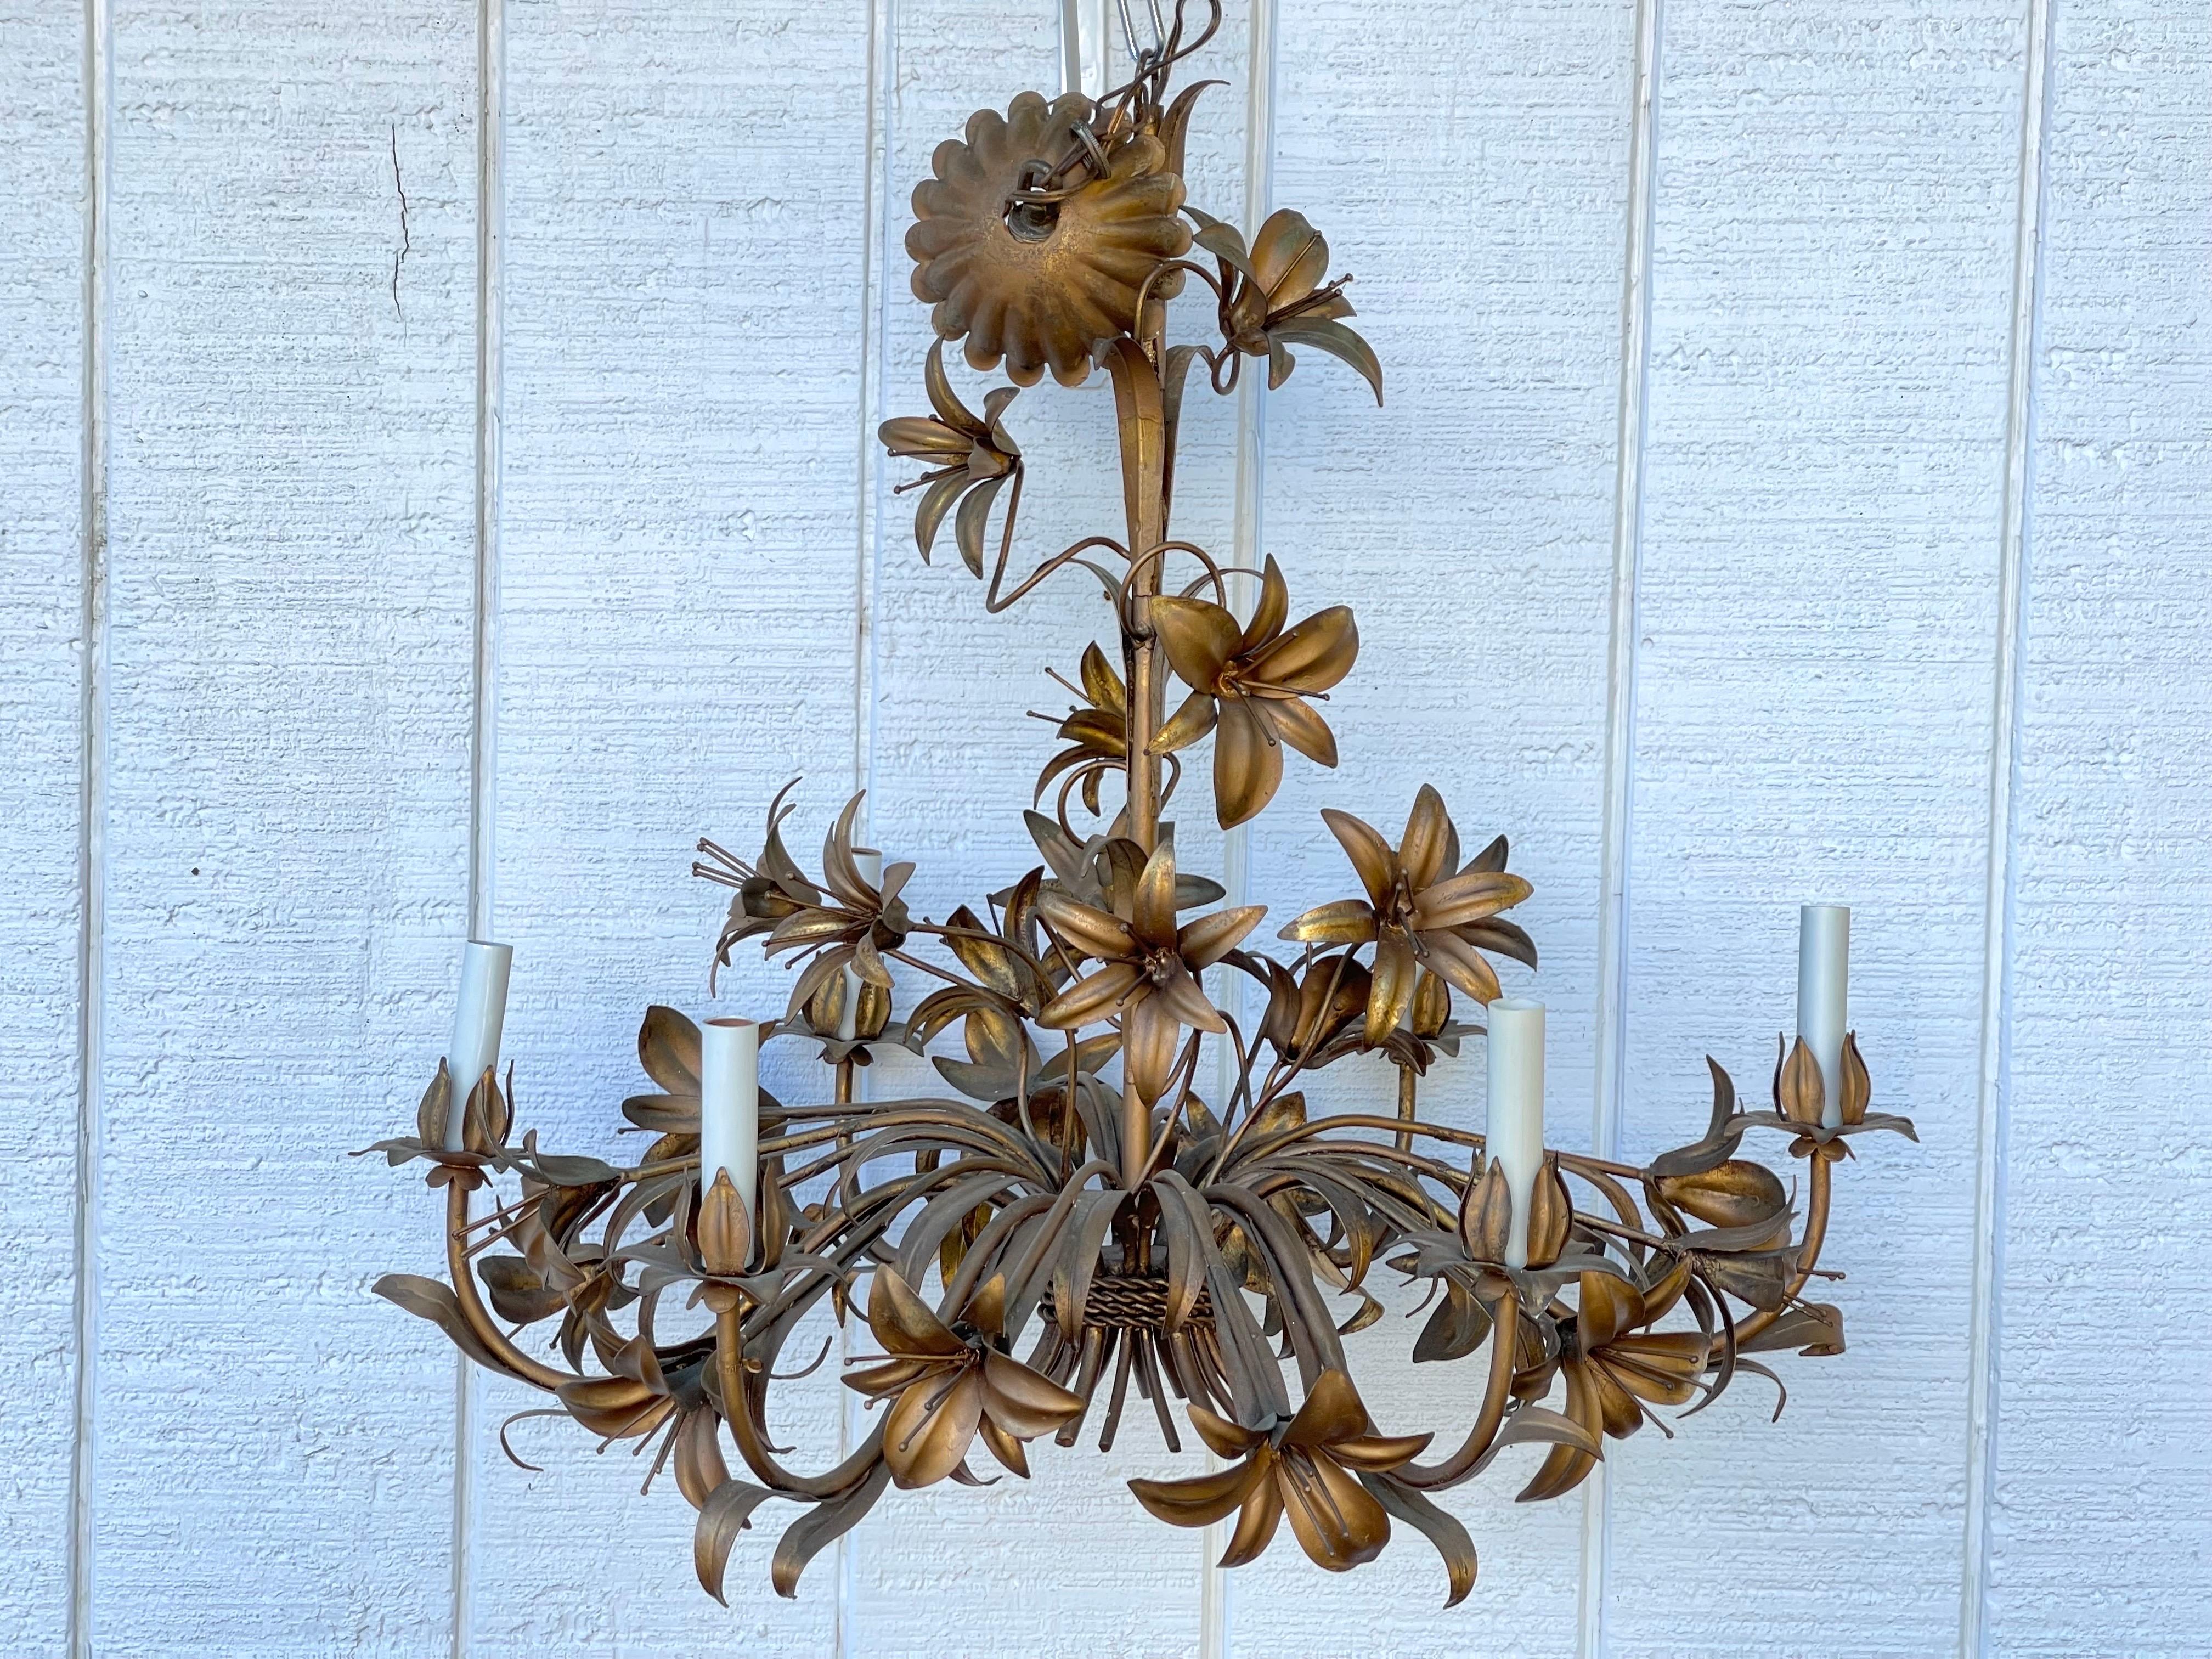 Italian Tole Lilly Chandelier. Gorgeous sculptural chandelier. Stamped with metal made in Italy label.